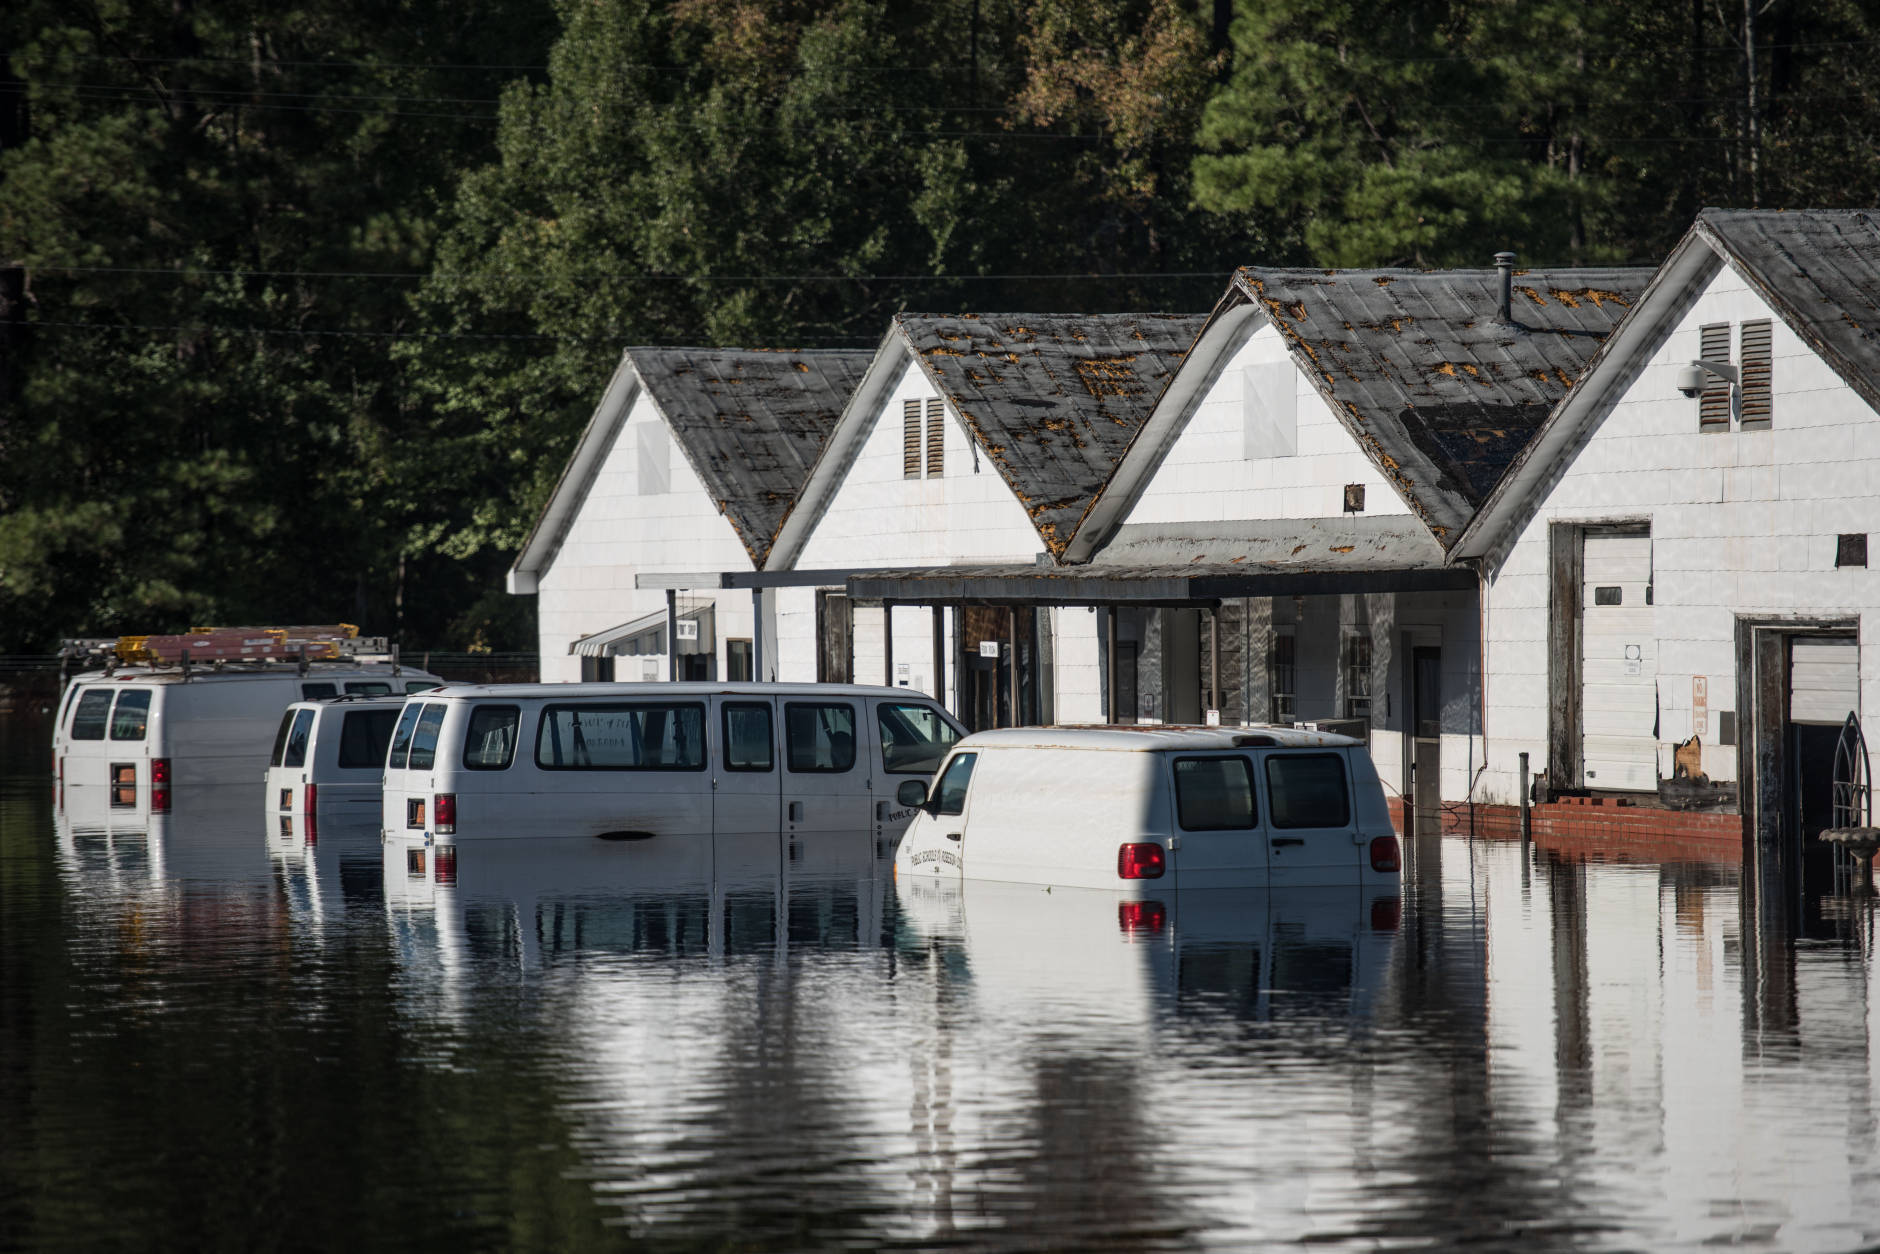 LUMBERTON, NC - OCTOBER 12: Vehicles are submerged vehicles at a Robeson County school parking lot on October 12, 2016 in Lumberton, North Carolina. Hurricane Matthew's heavy rains ended over the weekend, but flooding is still expected for days in North Carolina. (Photo by Sean Rayford/Getty Images)